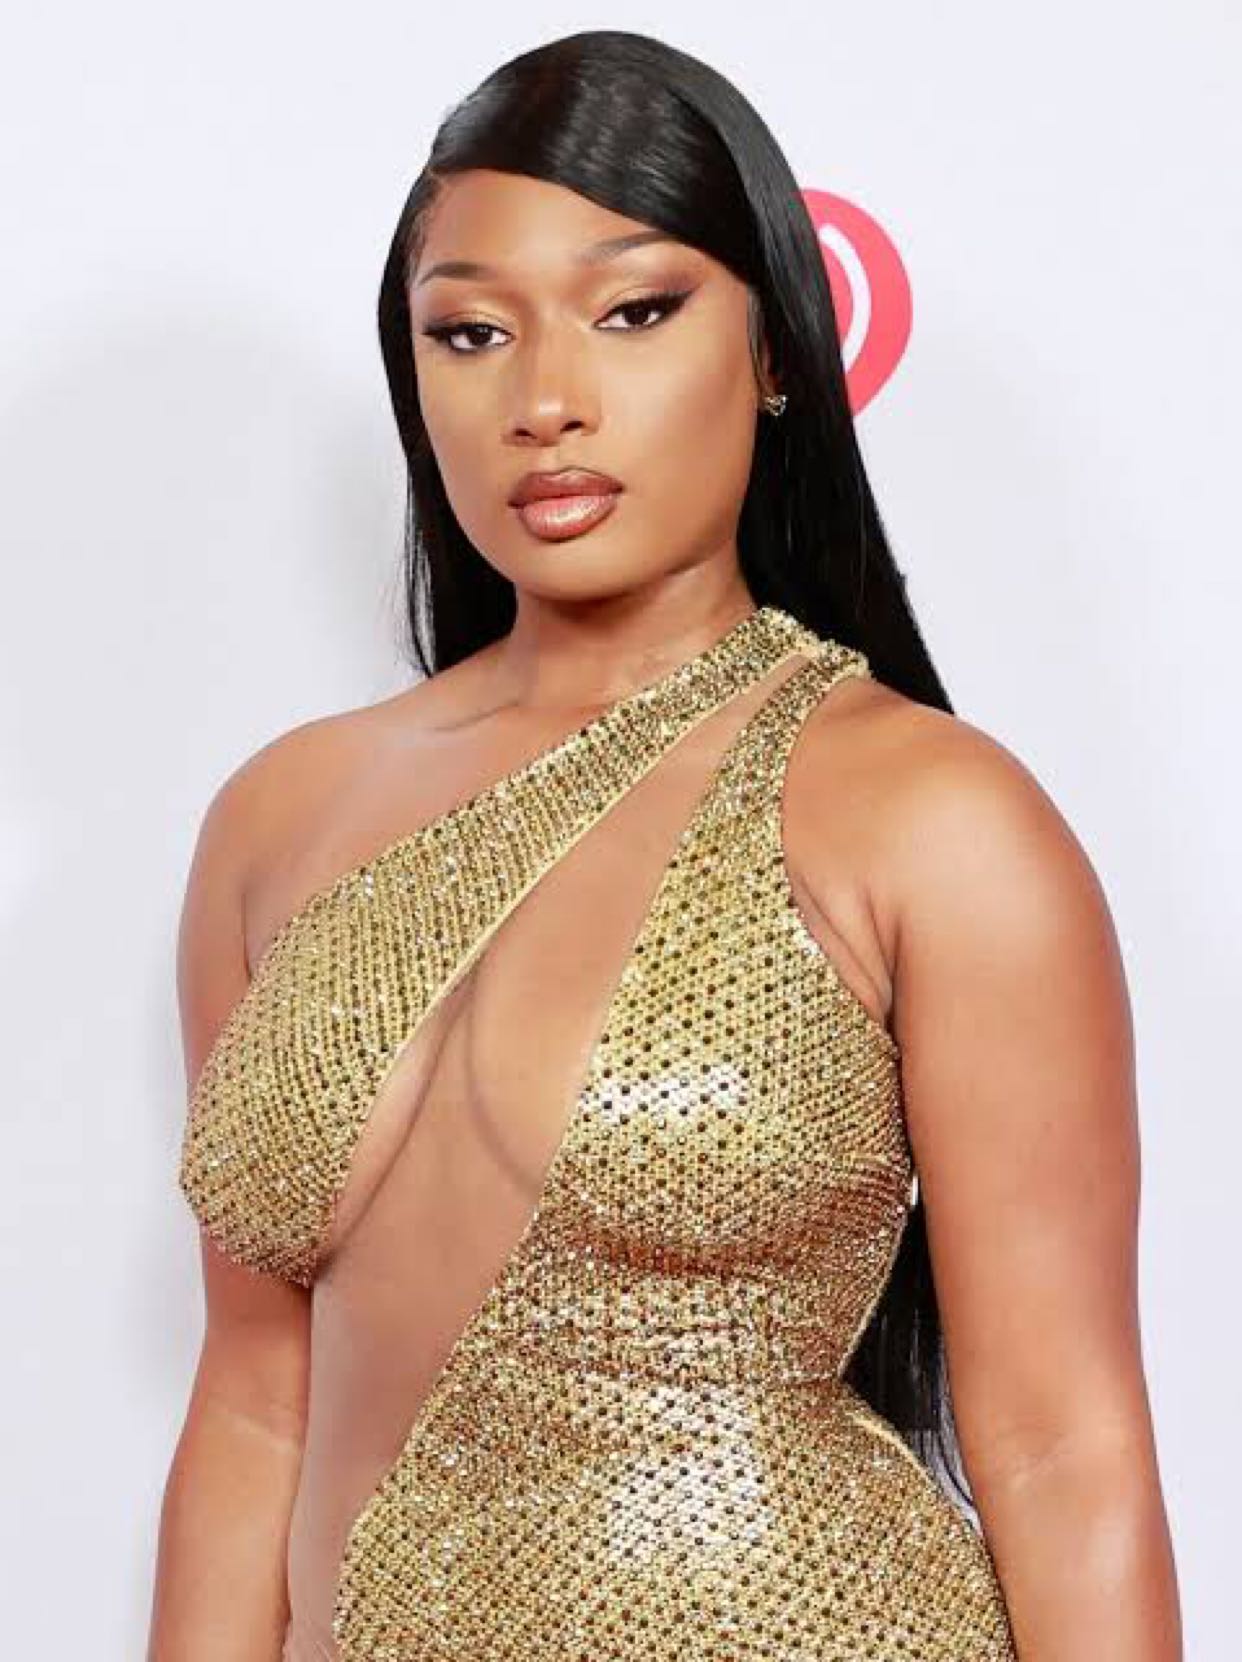 Would You Like To Attend Megan Thee Stallion’s Graduation?